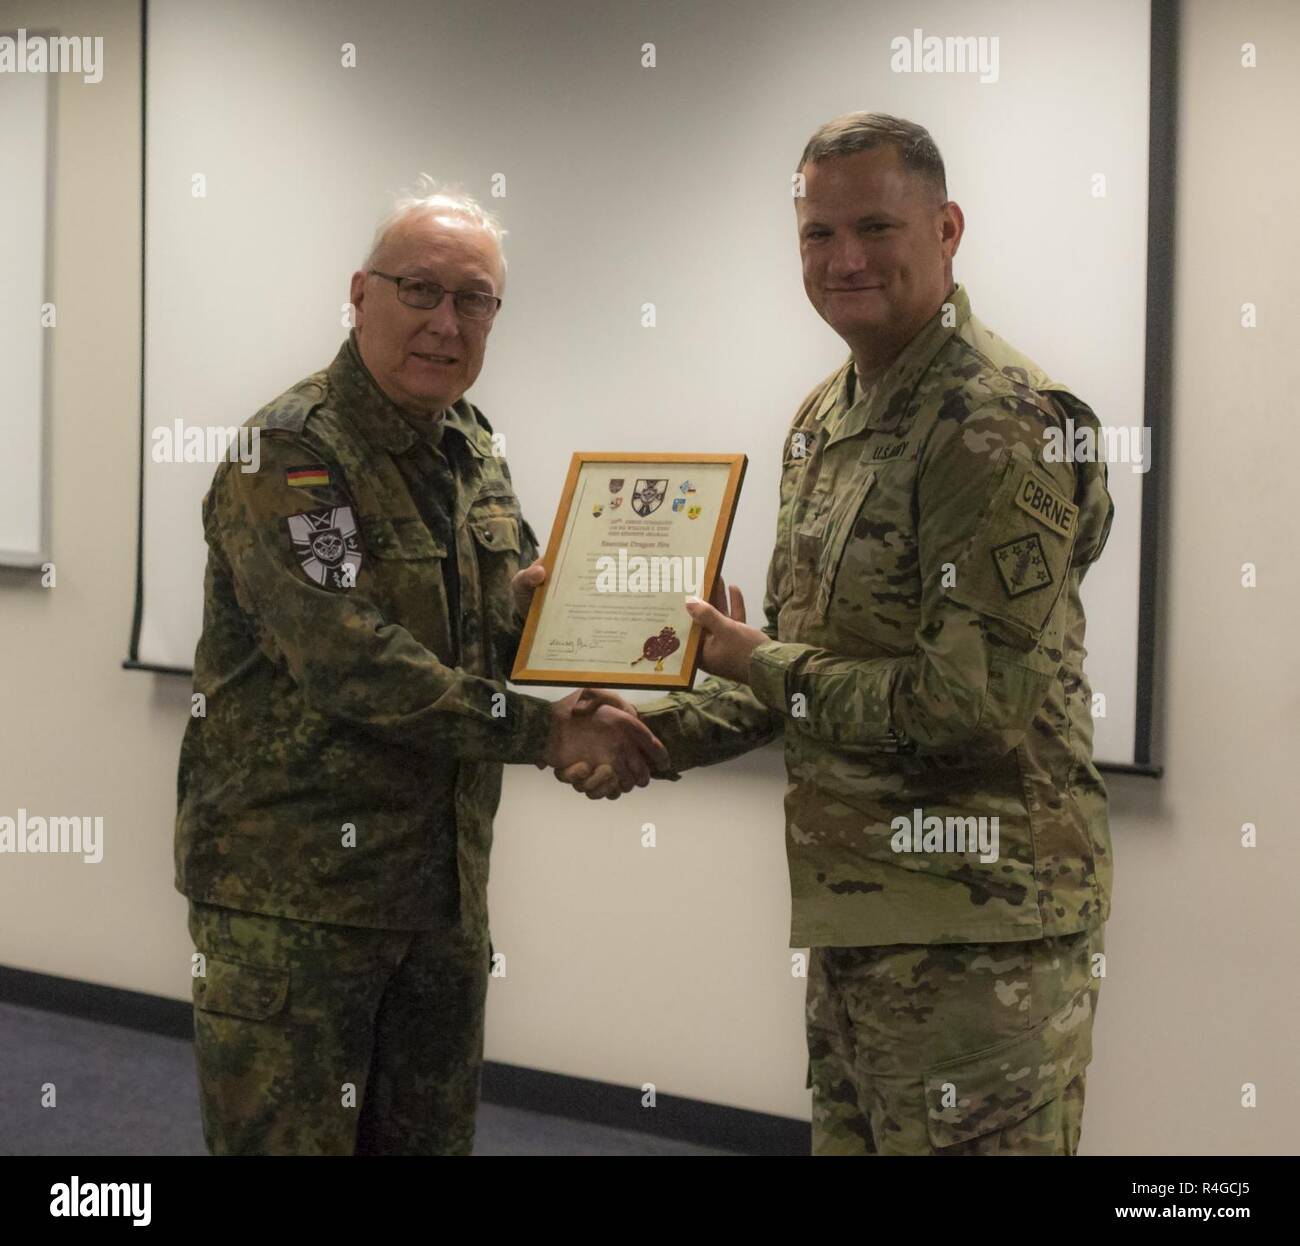 U.S. Army Brig. Gen. William E. King IV, Commander of the 20th CBRNE Command, receives an award from Col. Henry Neumann, Bundeswehr CBRN Commander, Satsop , Wash., May 2, 2017. Dragon fire is a bilateral exercise between the 48th Chemical, Biological, Radiological, and Nuclear (CBRN) Brigade and the German Bundswehr CBRN Defense command. It also serves as the culmination training event and validation exercise for the 22nd CBRN Battalion. Stock Photo